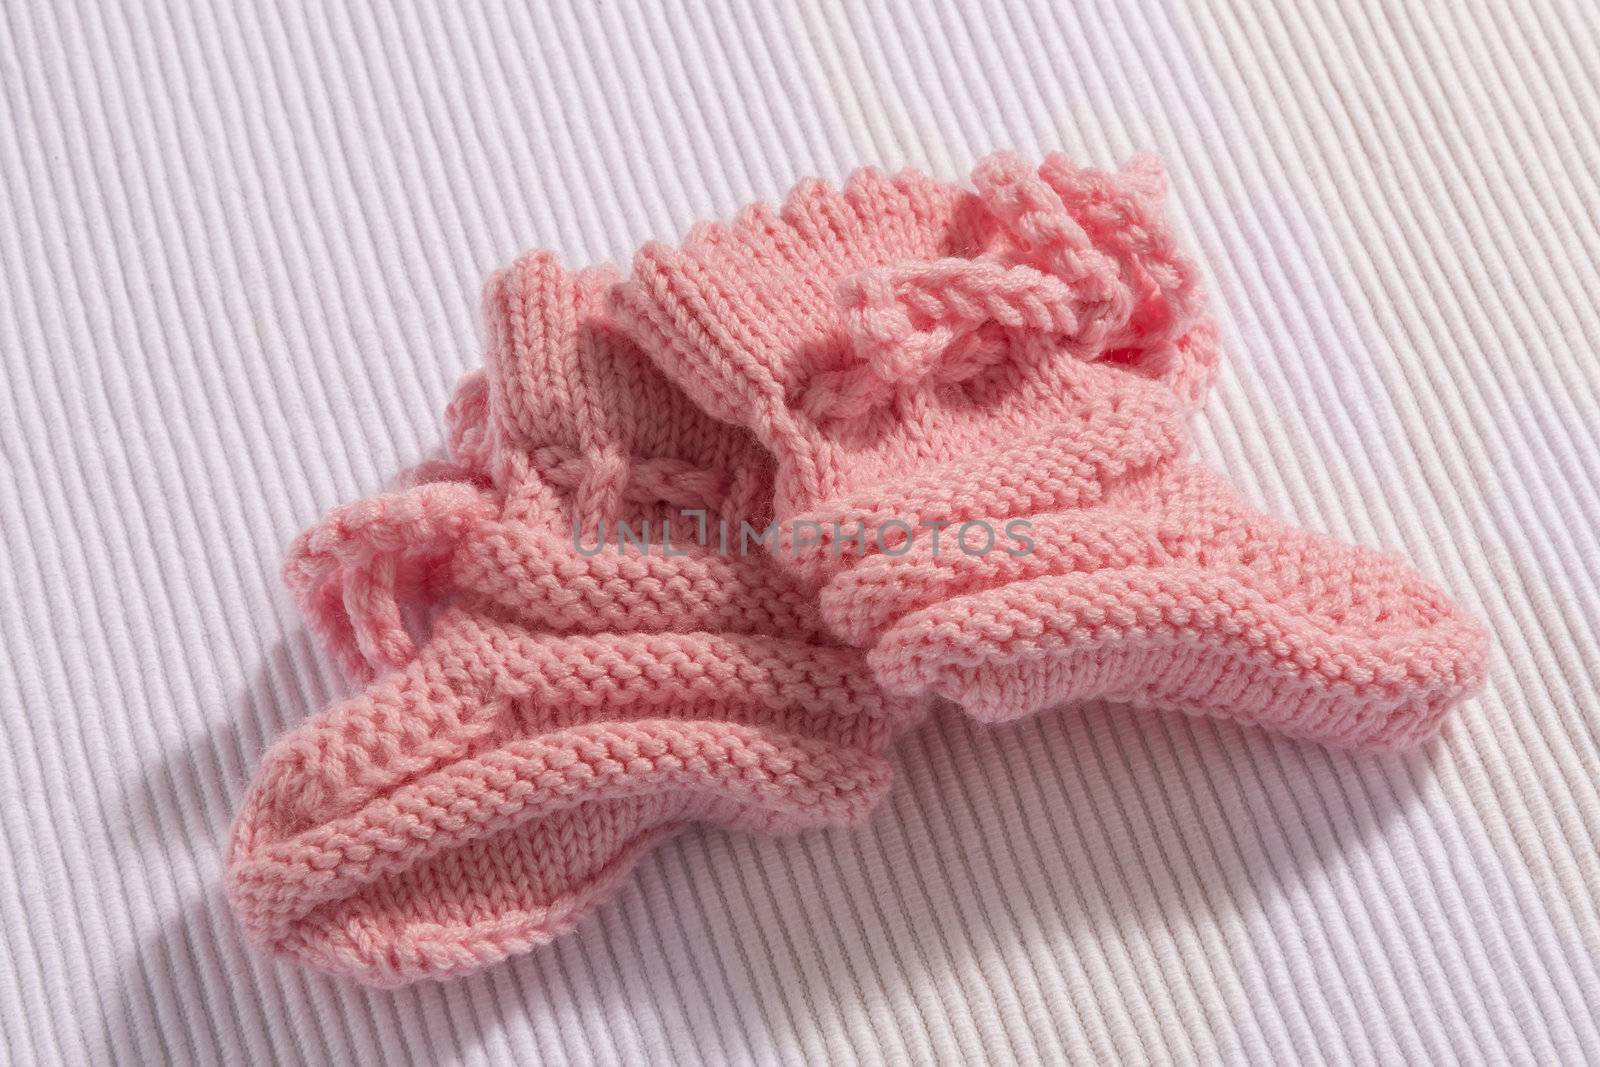 Pair of self knitted pink baby socks on white background